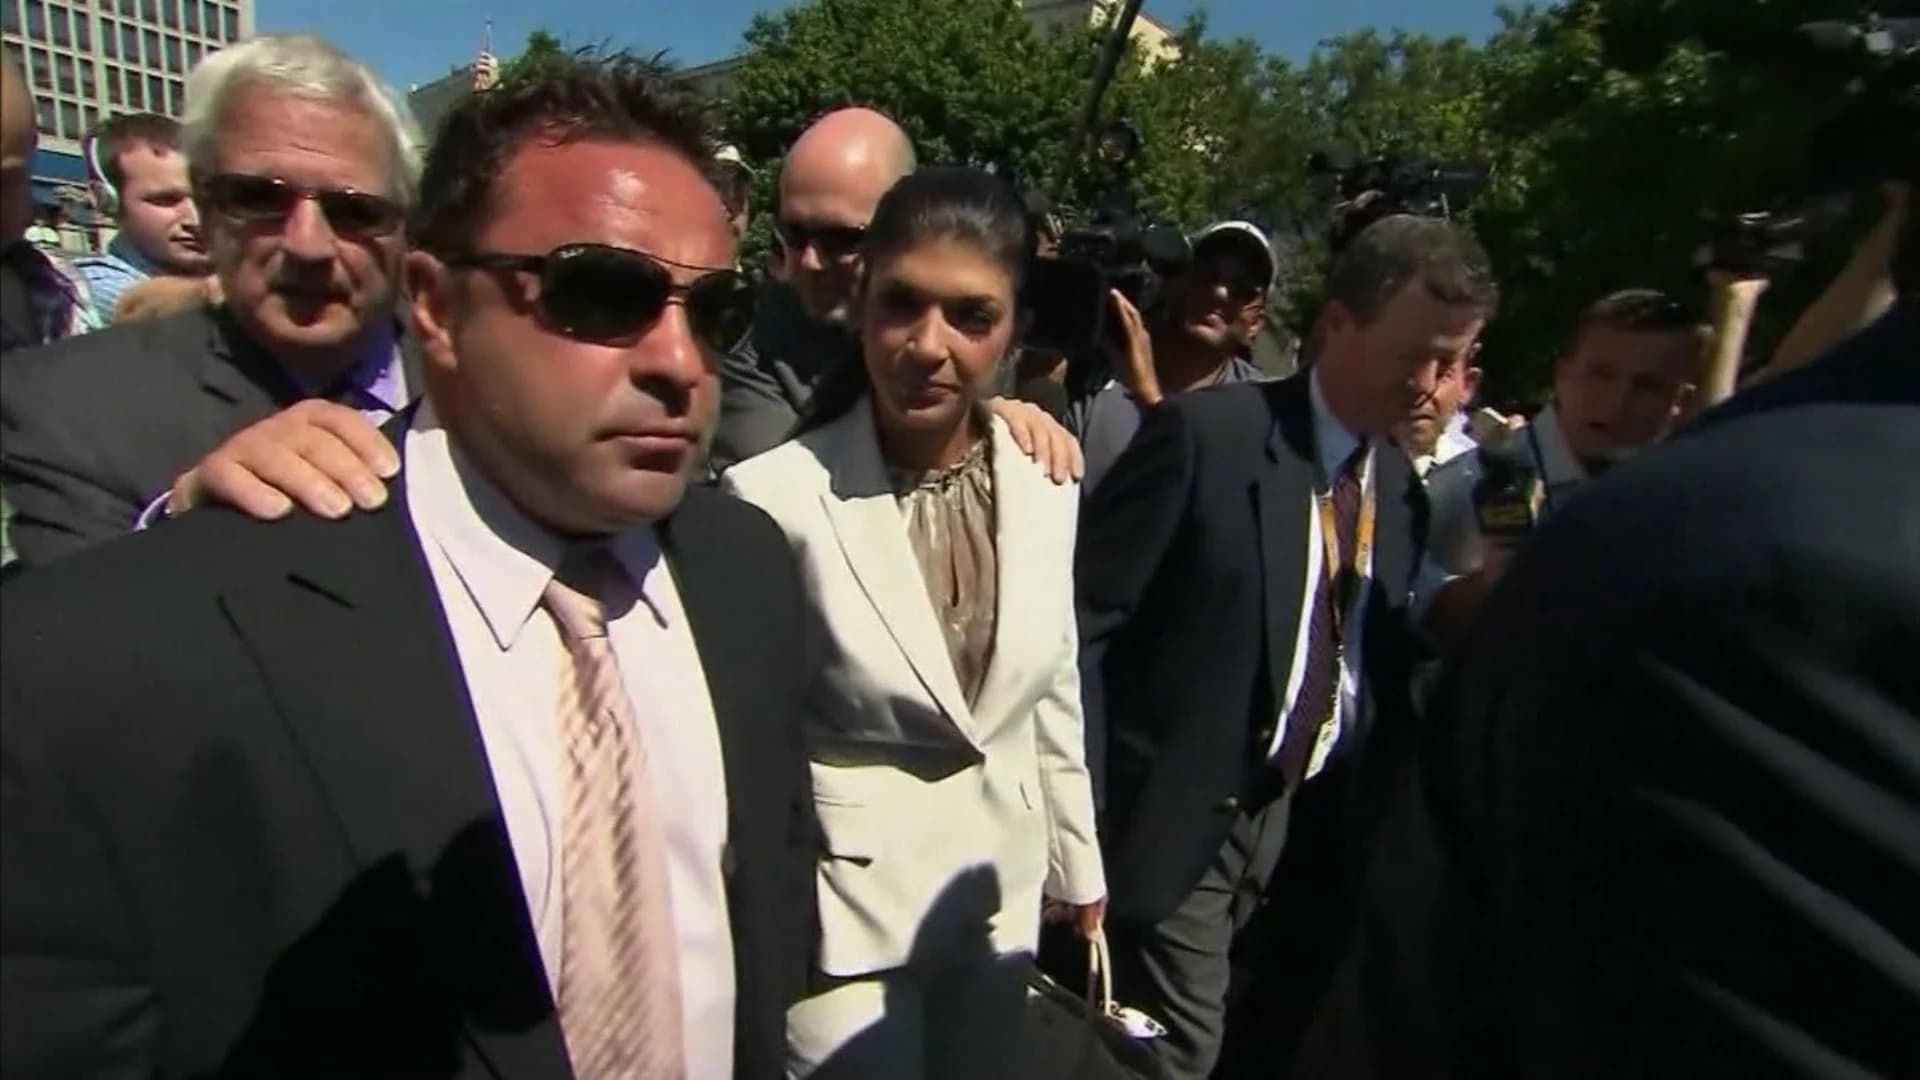 Deportation looms for convicted 'Real Housewives' husband Joe Giudice